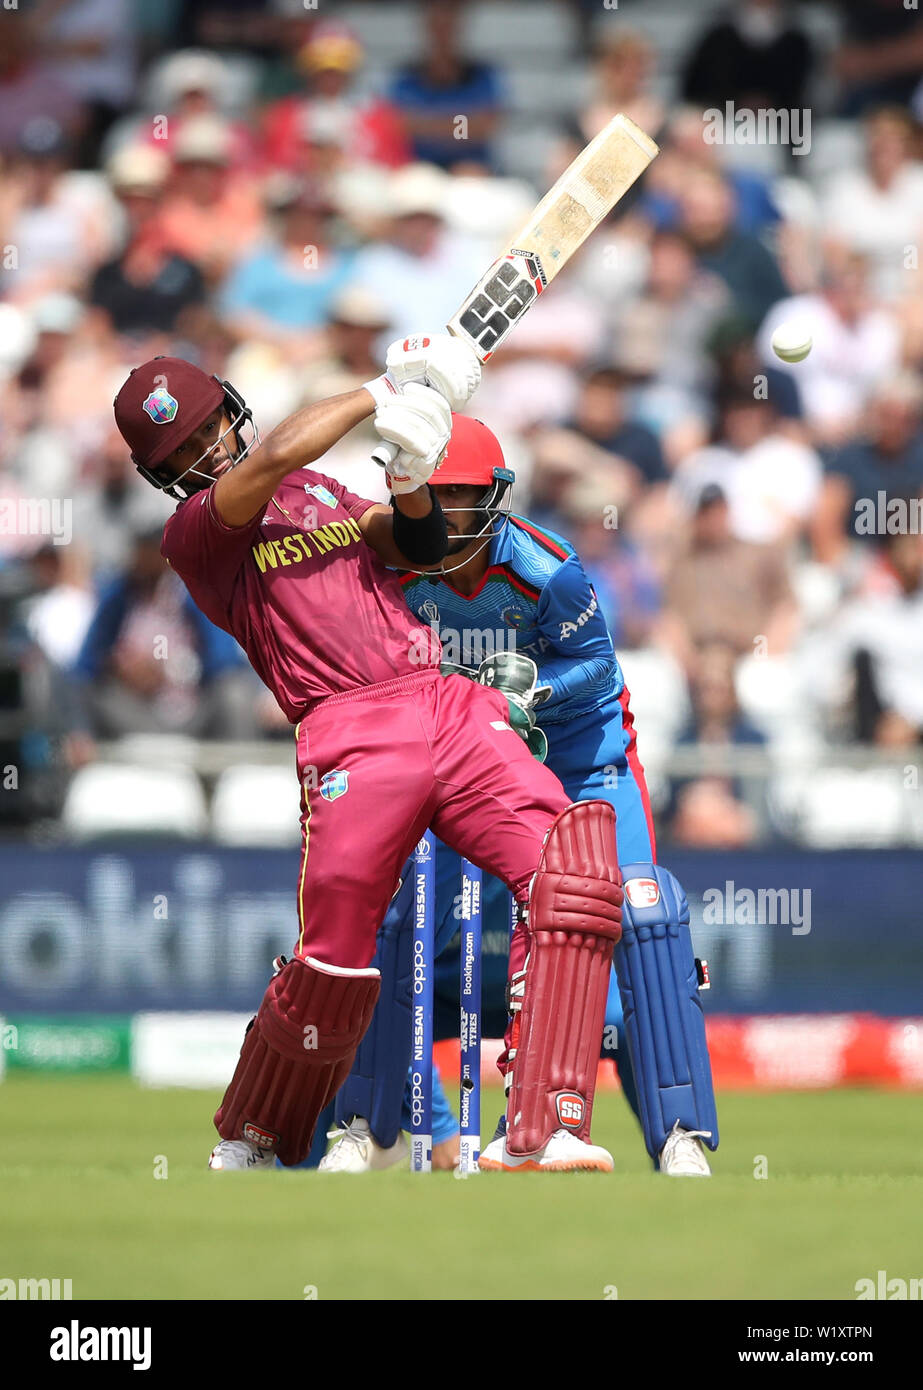 West Indies' Shai Hope strikes the ball for a boundary during the ICC Cricket World Cup group stage match at Headingley, Leeds. Stock Photo